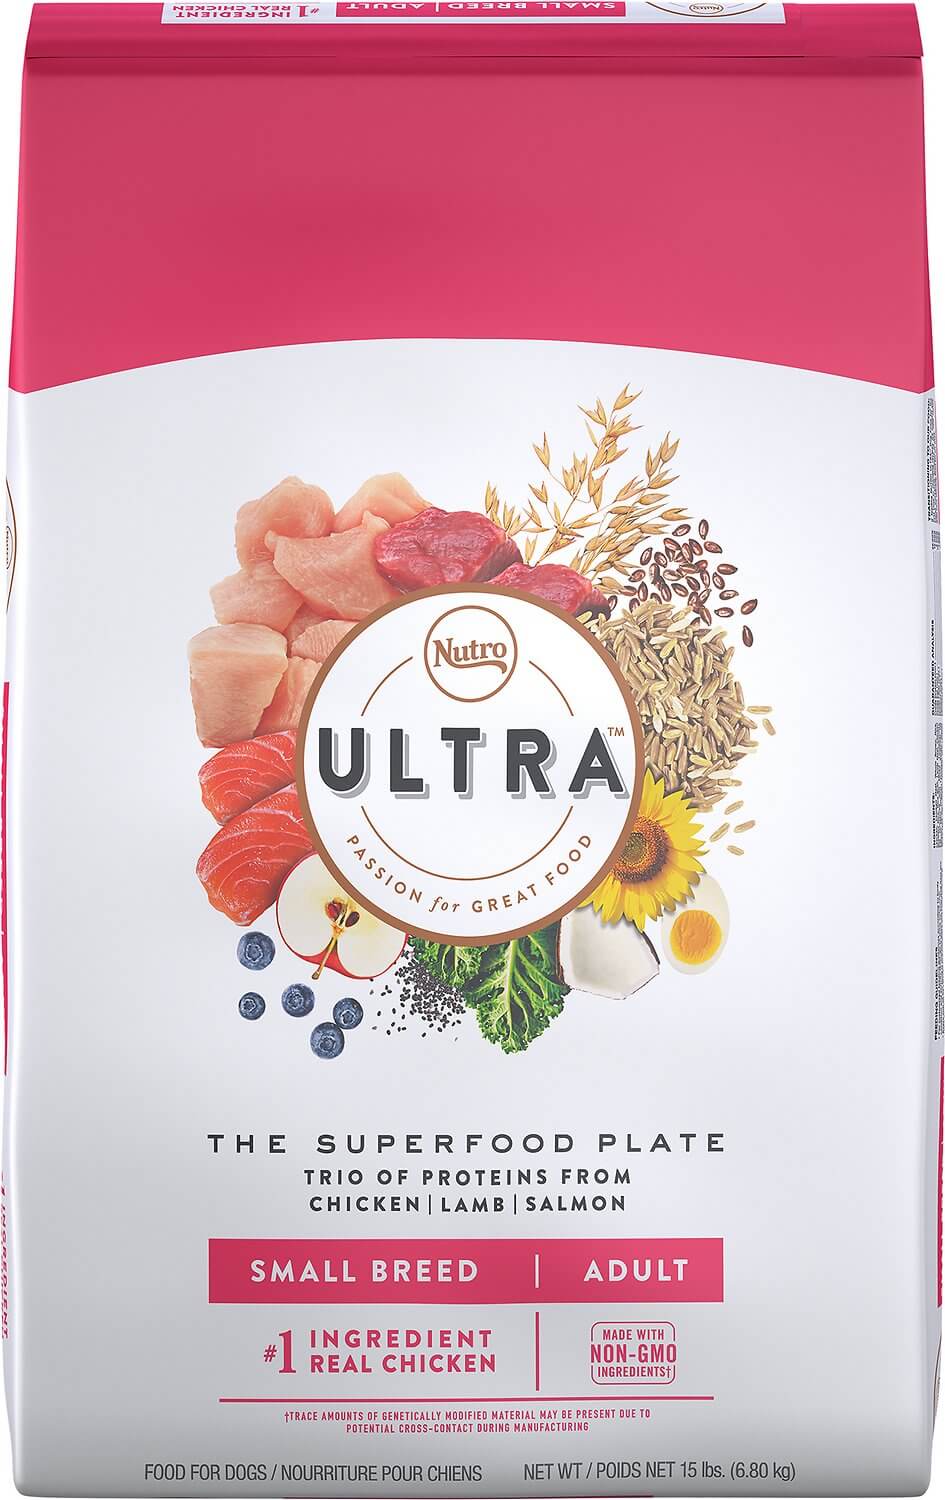 Nutro Ultra Dog Food Review (Dry)